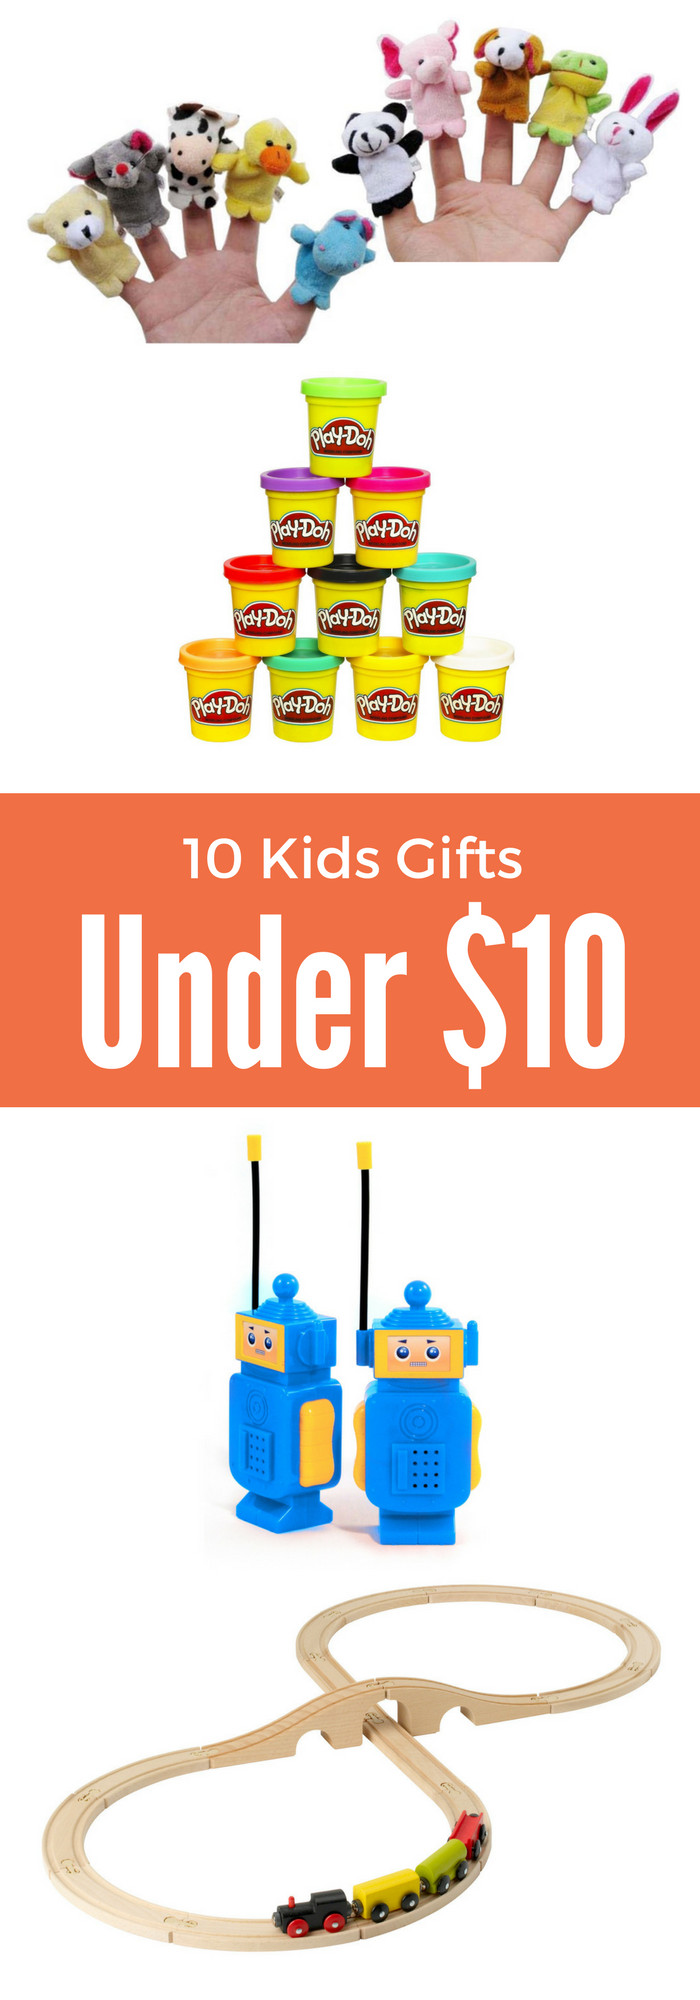 Gifts Under $10 For Kids
 Headed to a birthday party 10 Kids Gifts for $10 and